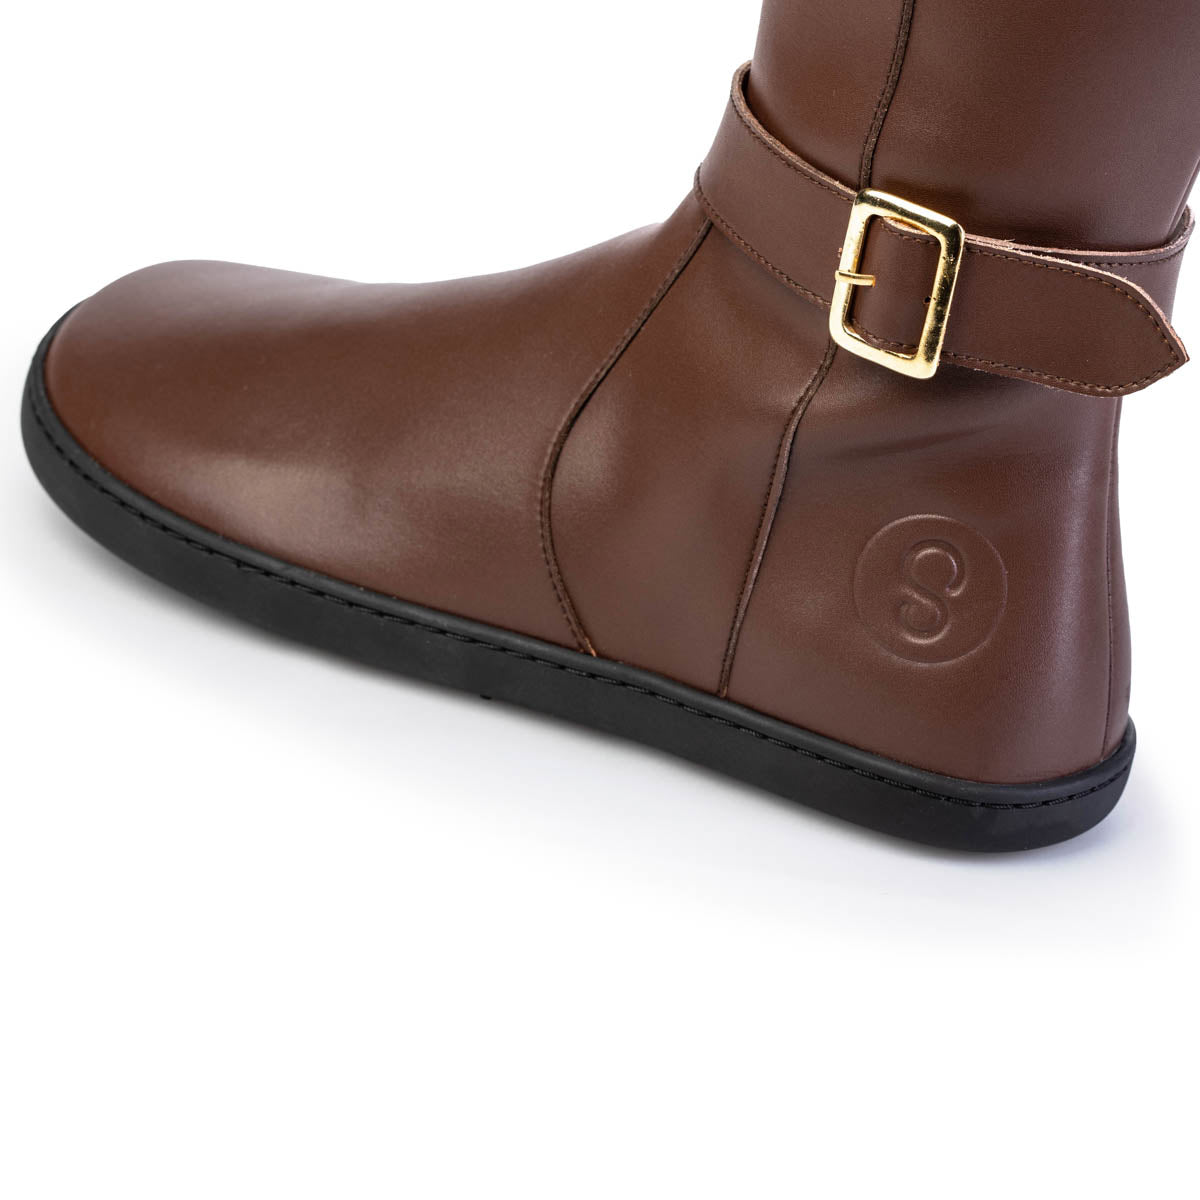 A photo of Shapen Glam lined riding boots made with leather a faux fur lining and rubber soles. The boots are brown in color with gold buckles on the top and around the ankle, the ankle buckle strap is removable. The left shoe is shown up close from the left side against a white background. #color_brown